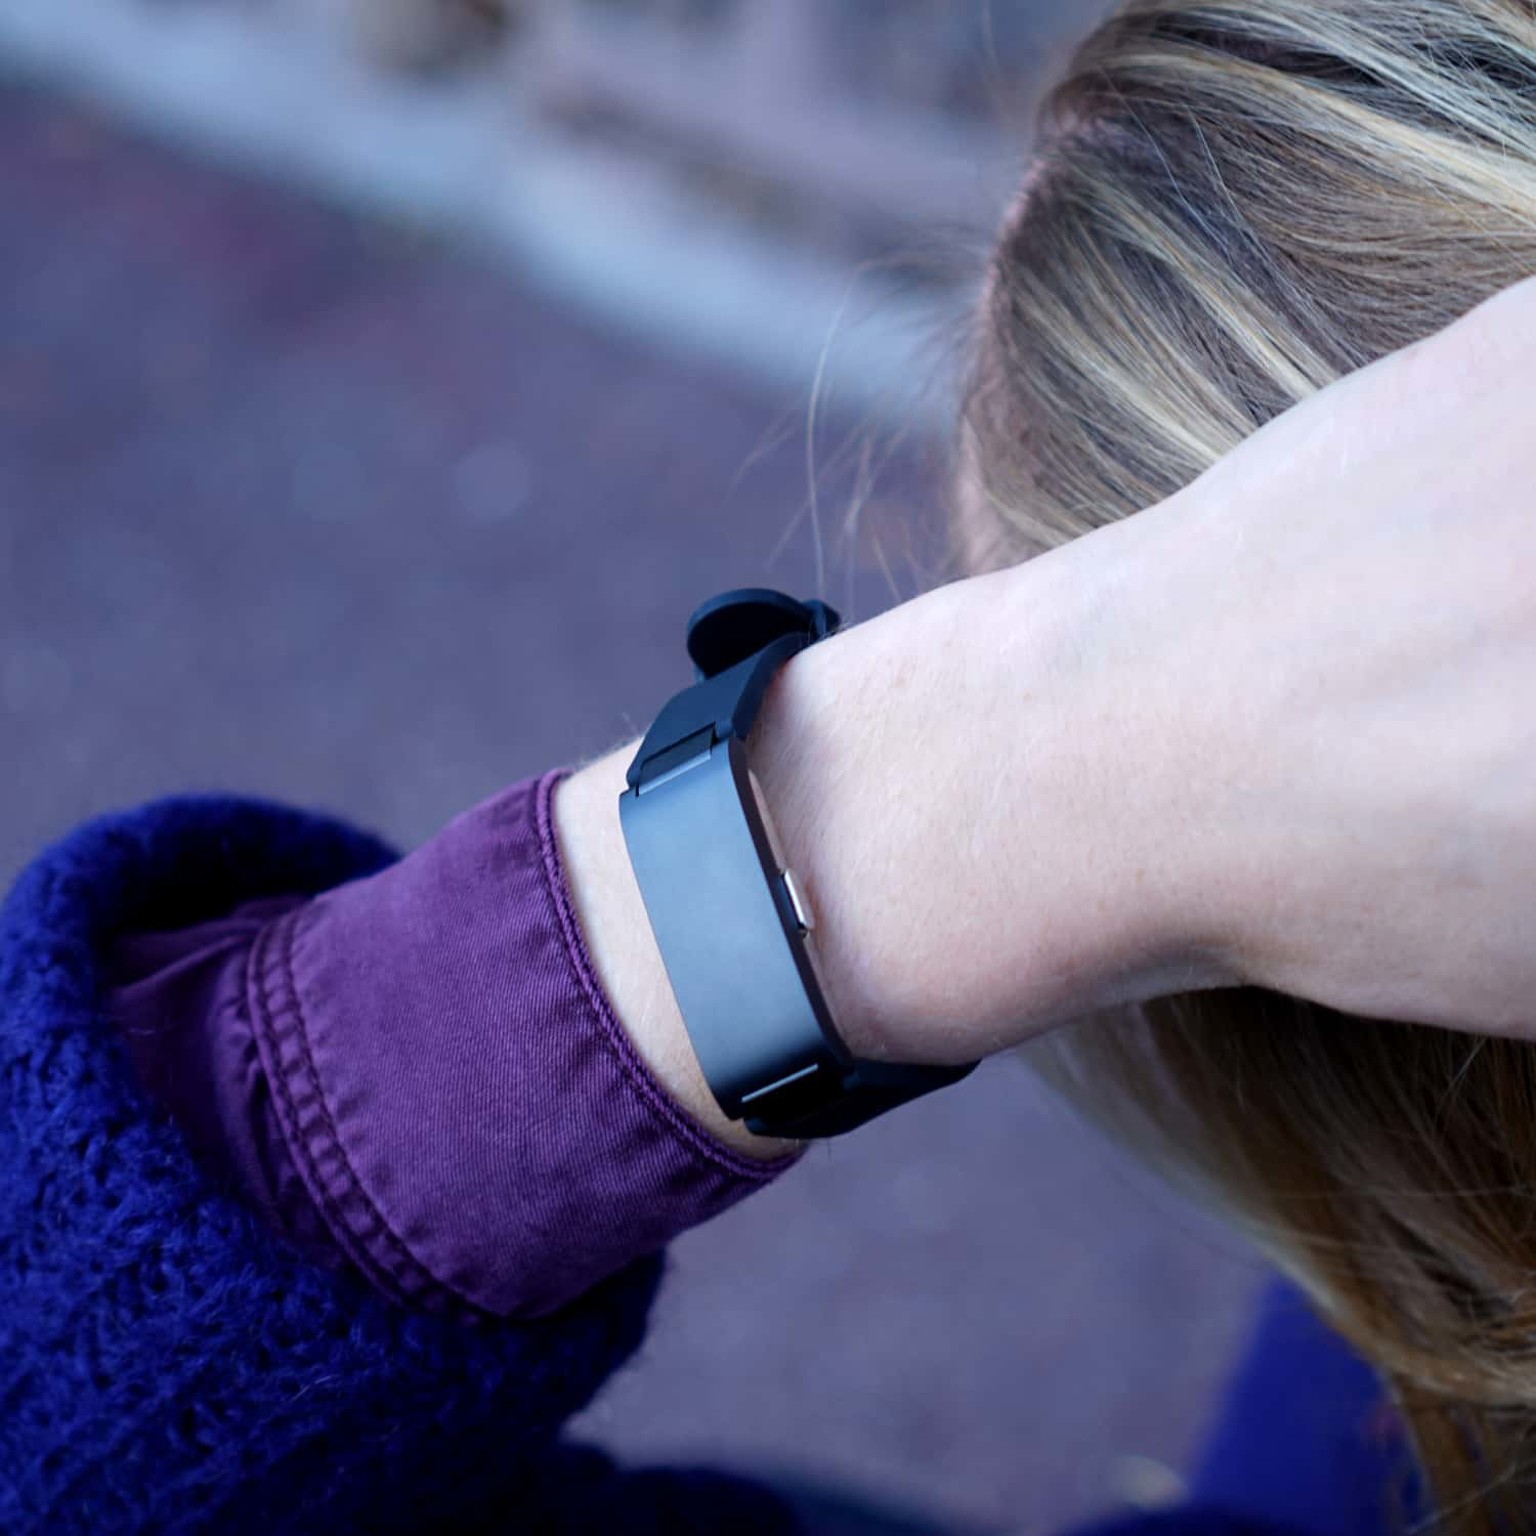 Withings wants to compete with Fitbit and launches Pulse HR fitness bracelet